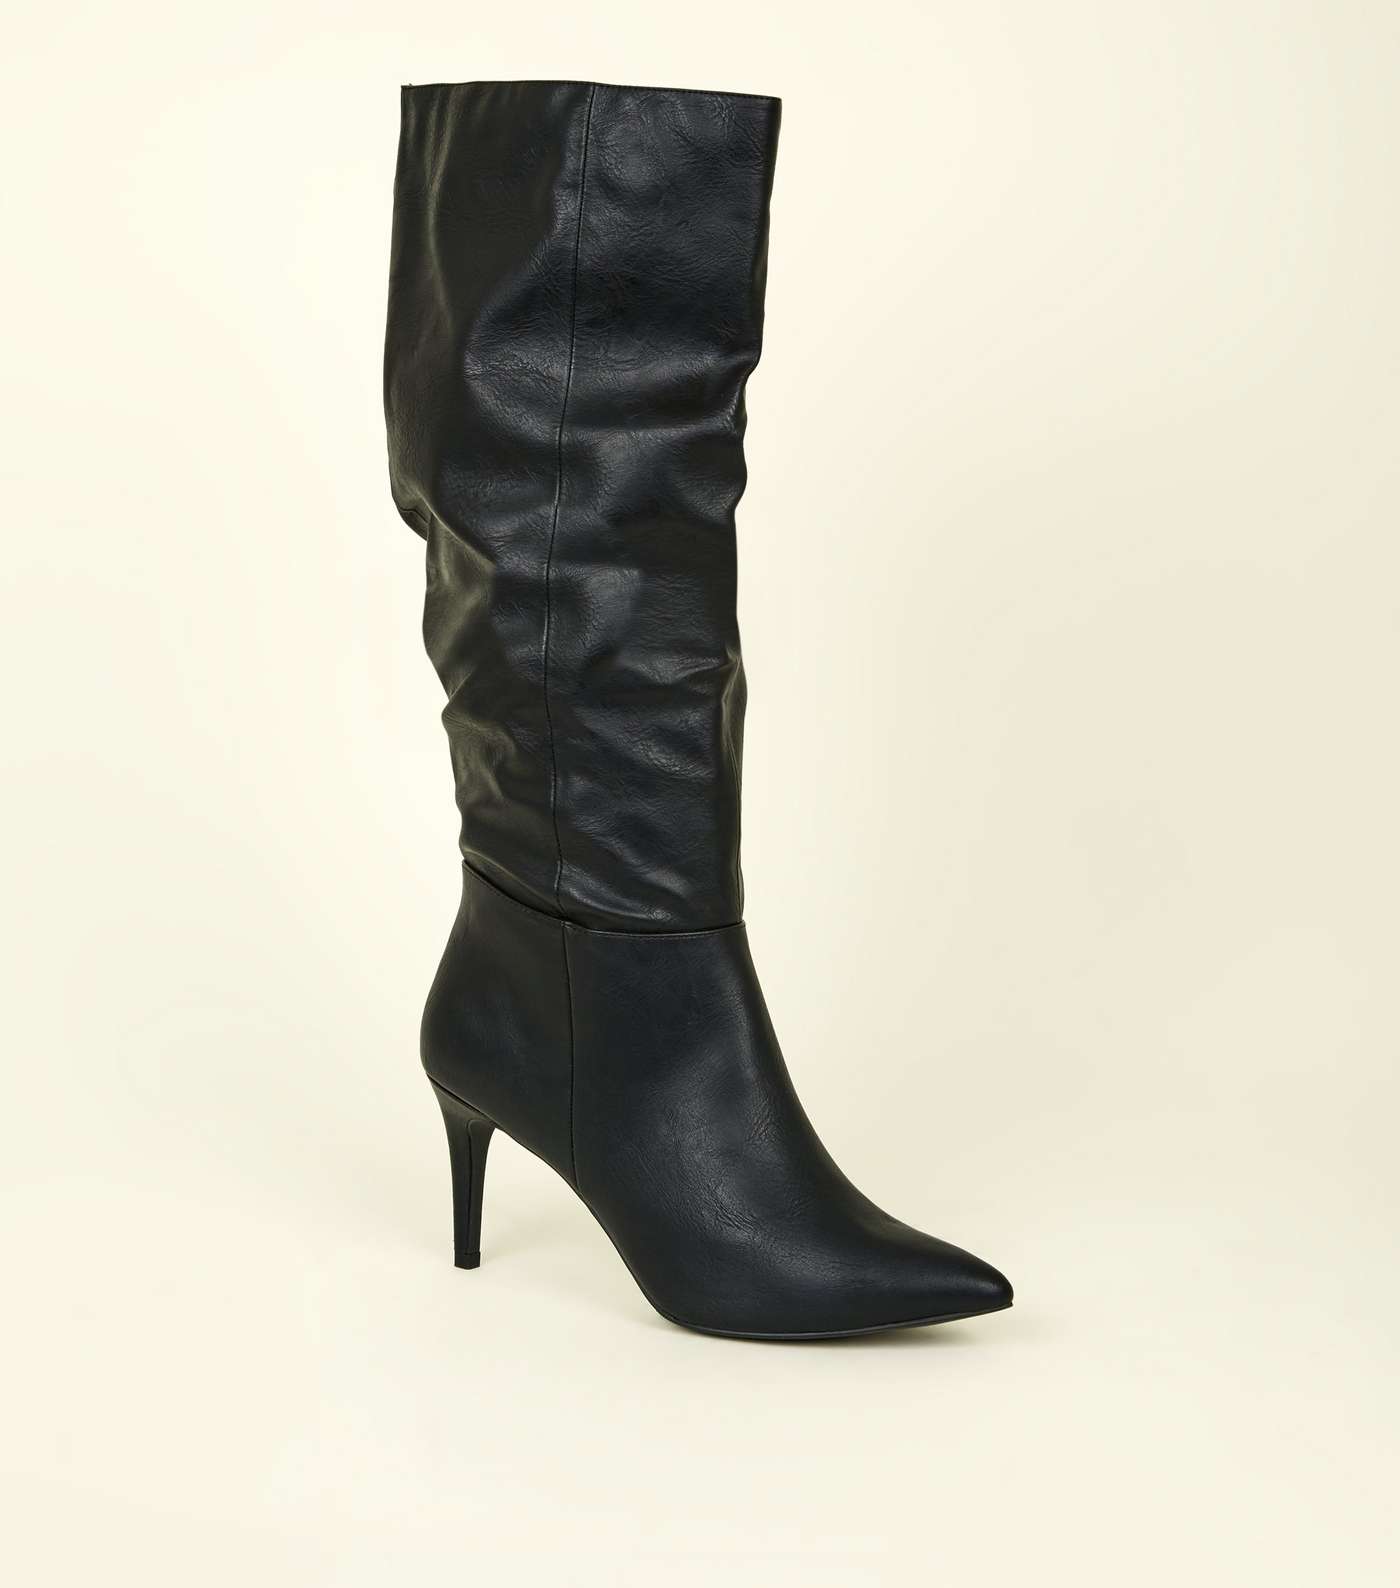 Black Leather-Look Knee High Stiletto Slouch Boots